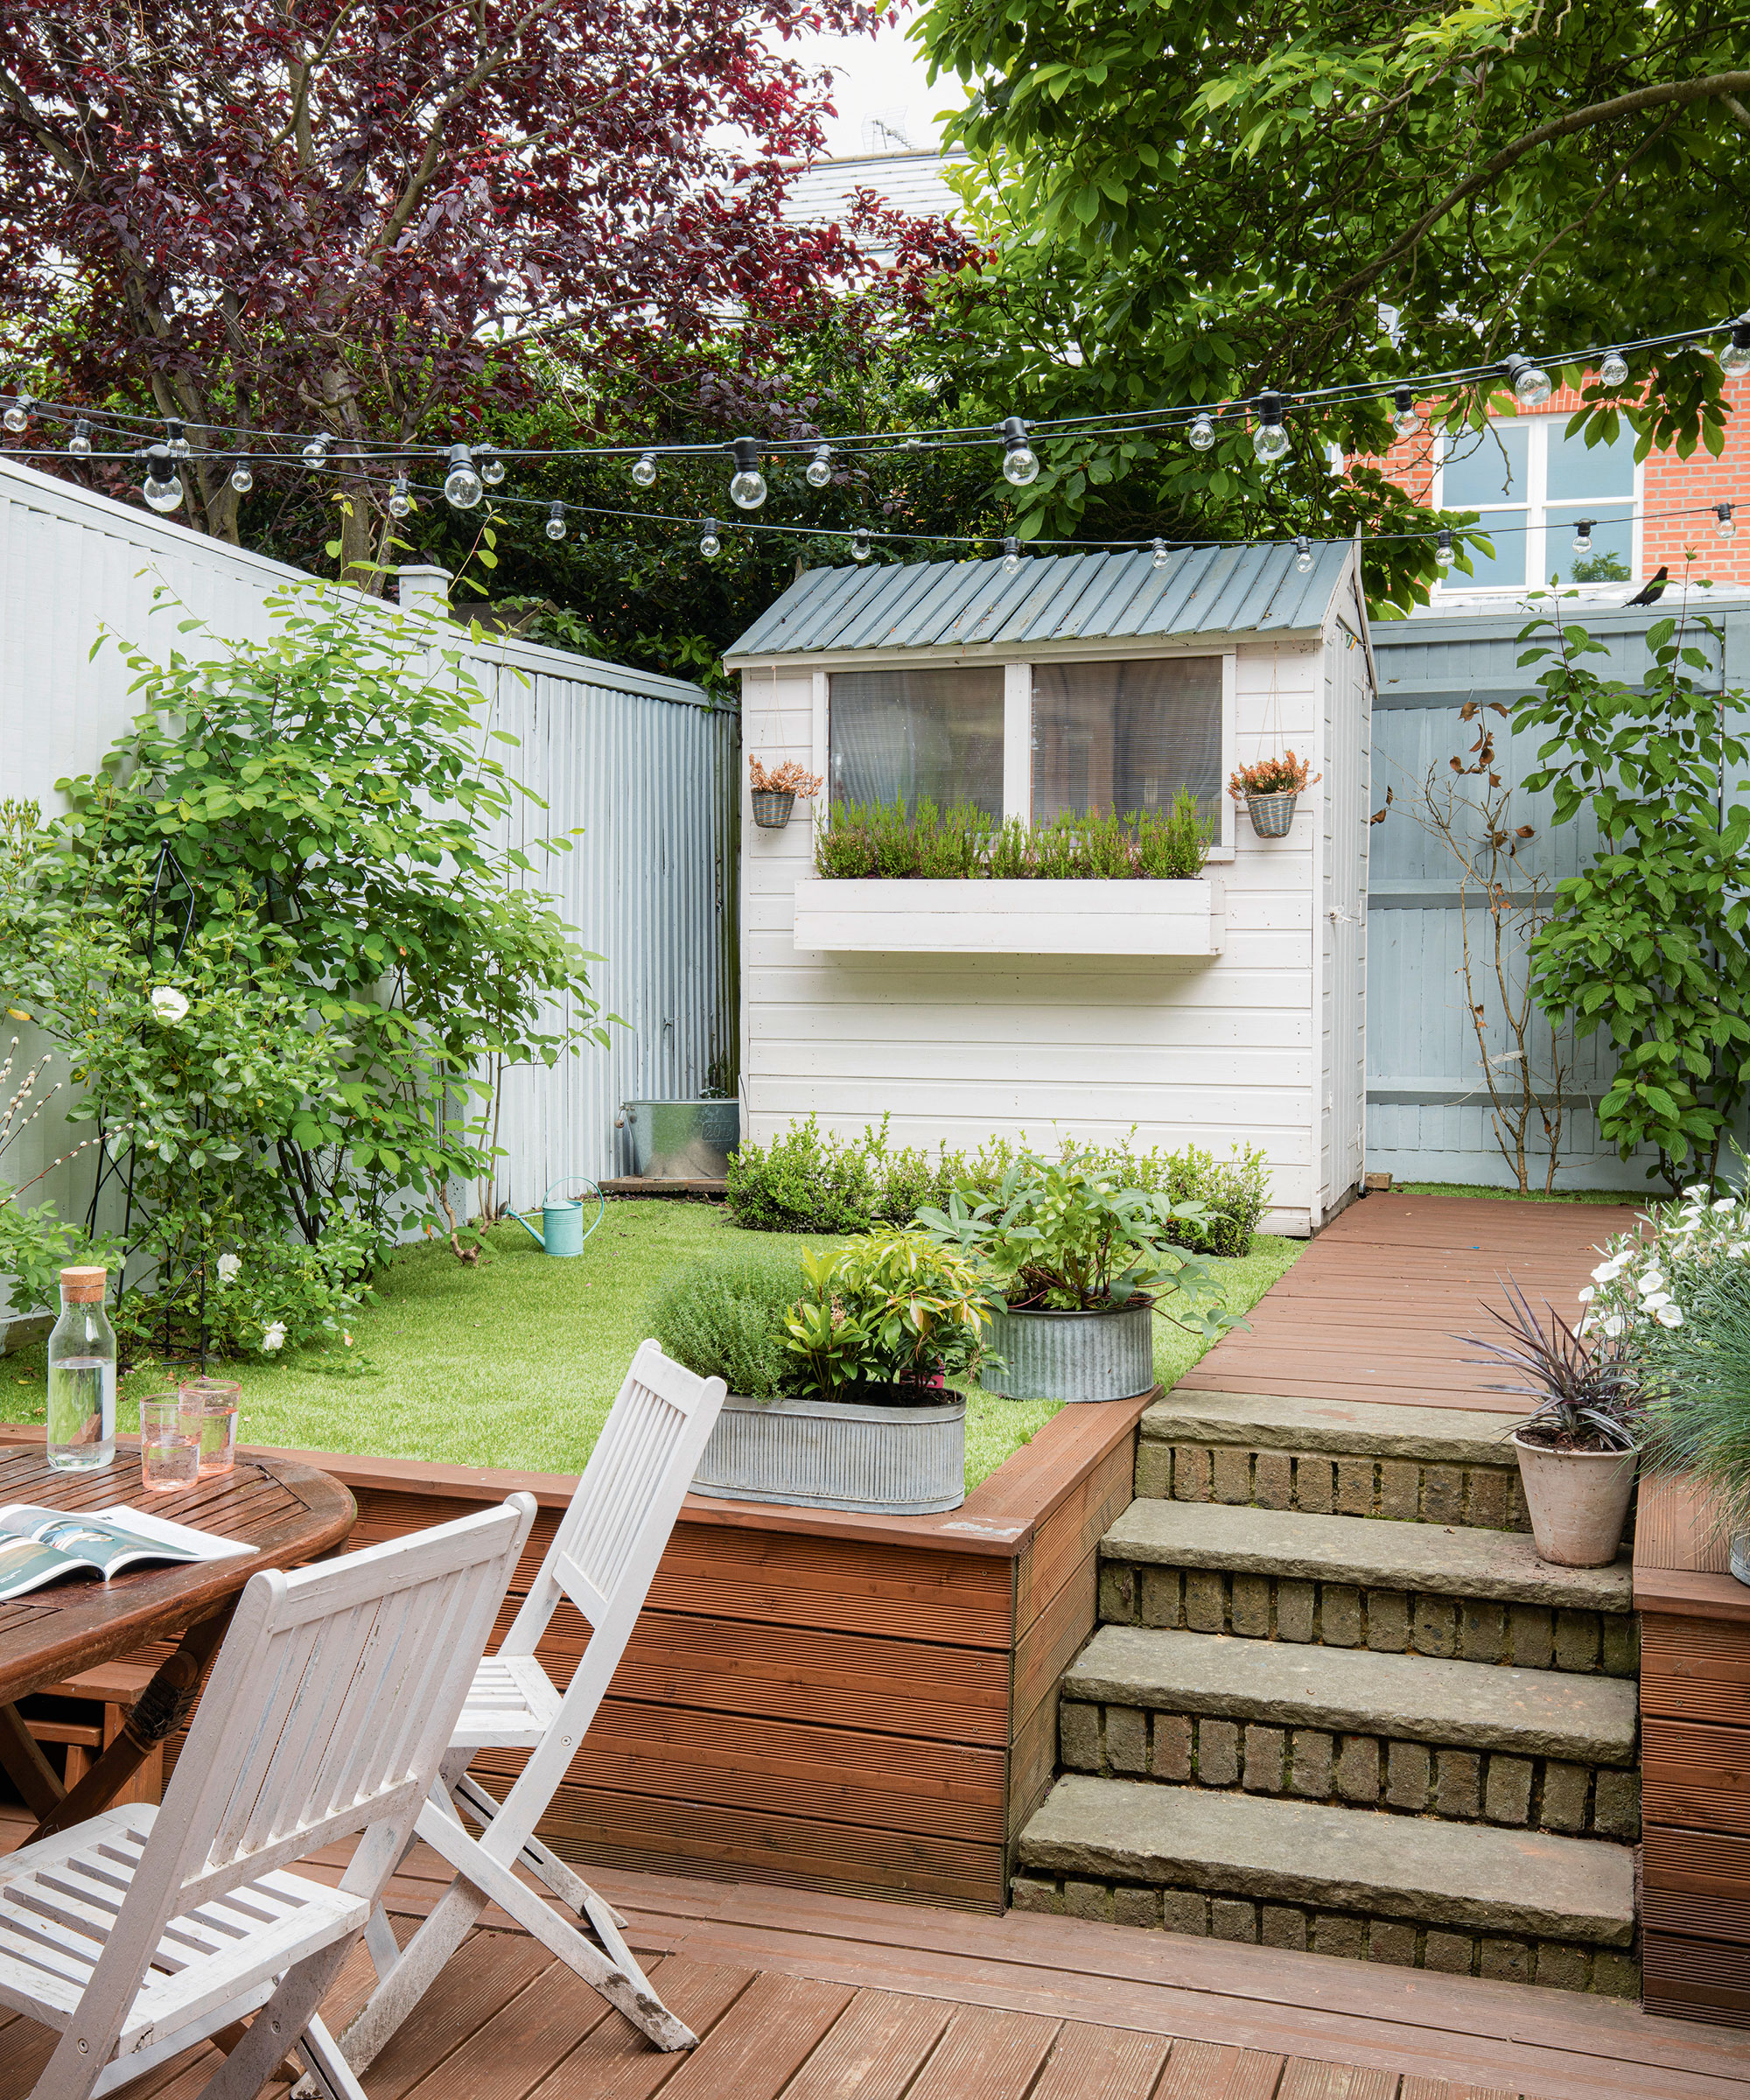 garden shed ideas – 25 inspiring looks for your own outdoor room